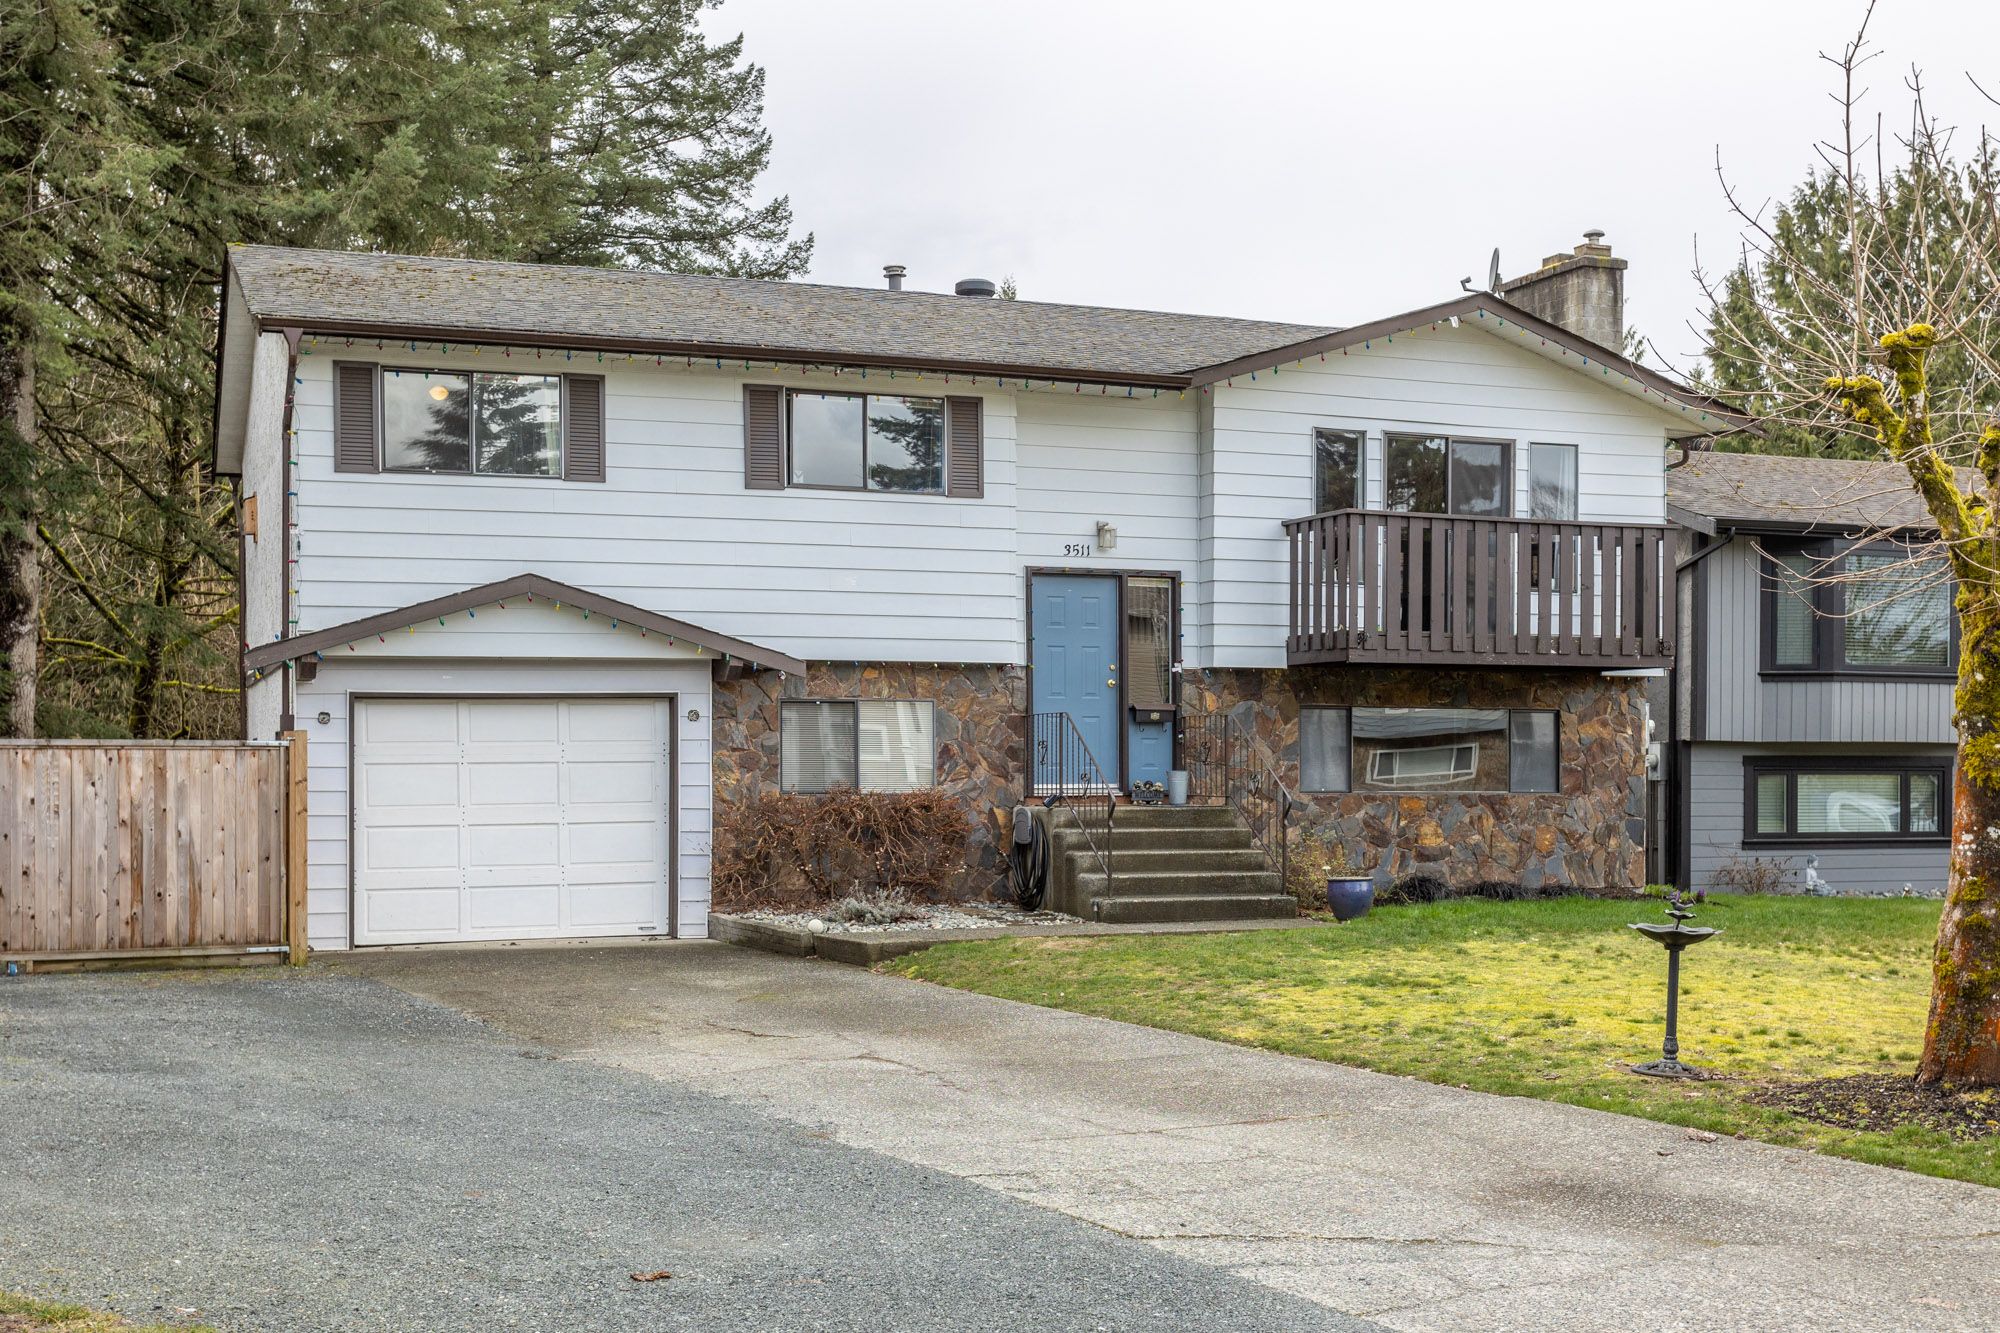 Main Photo: 3511 LATIMER STREET in Abbotsford: Abbotsford East House for sale : MLS®# R2664667